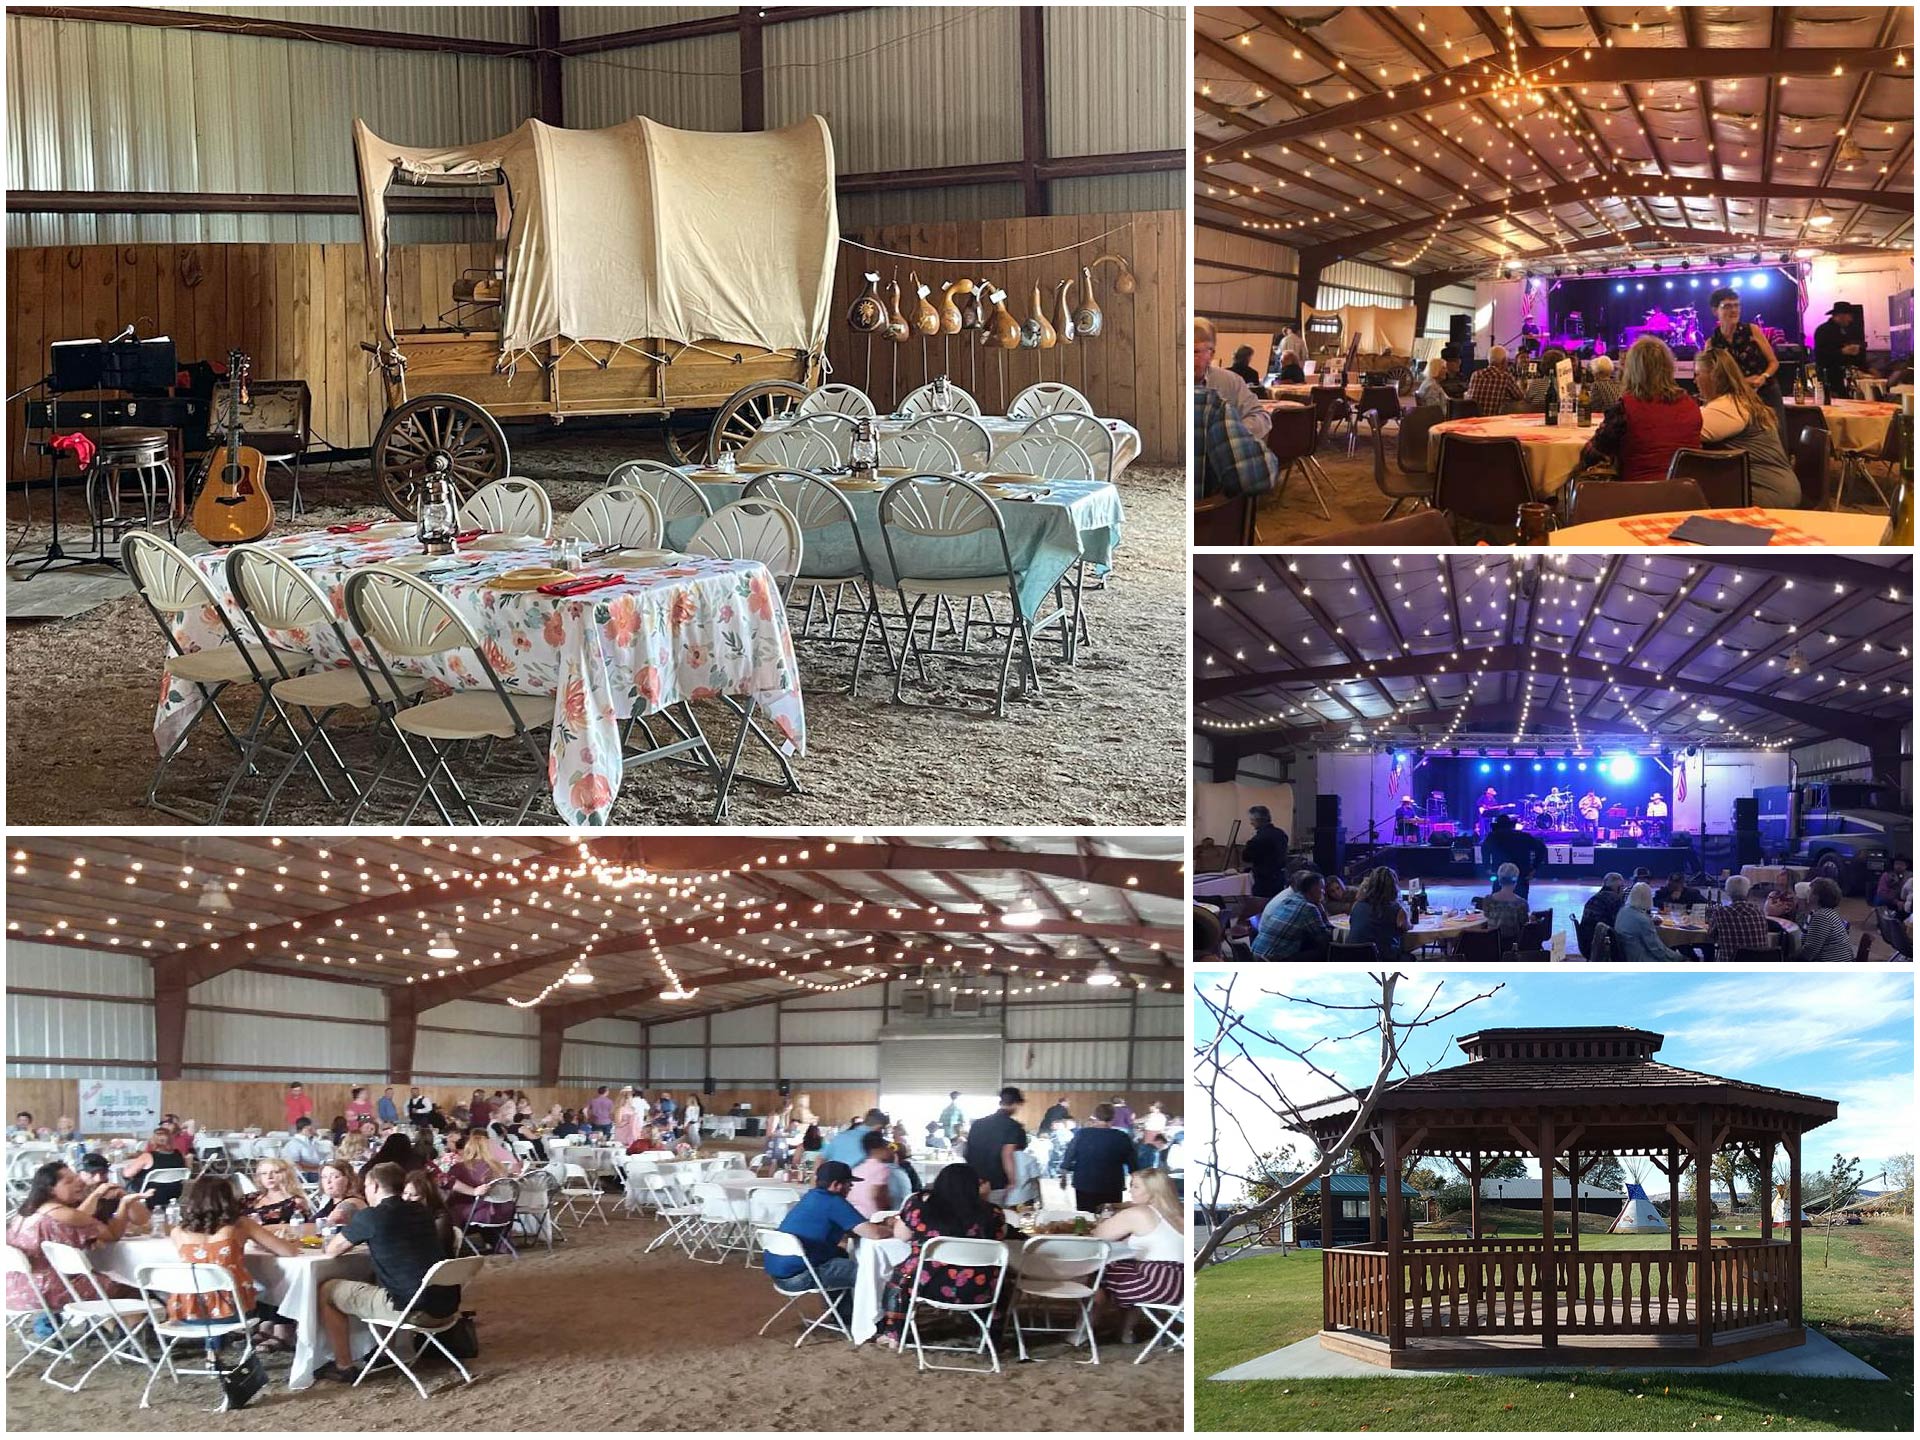 Angel Horses' arena can be transformed into a great event venue to host wedding receptions, concerts and gatherings. Imagine yourself enjoying a day or evening at Angel Horses!